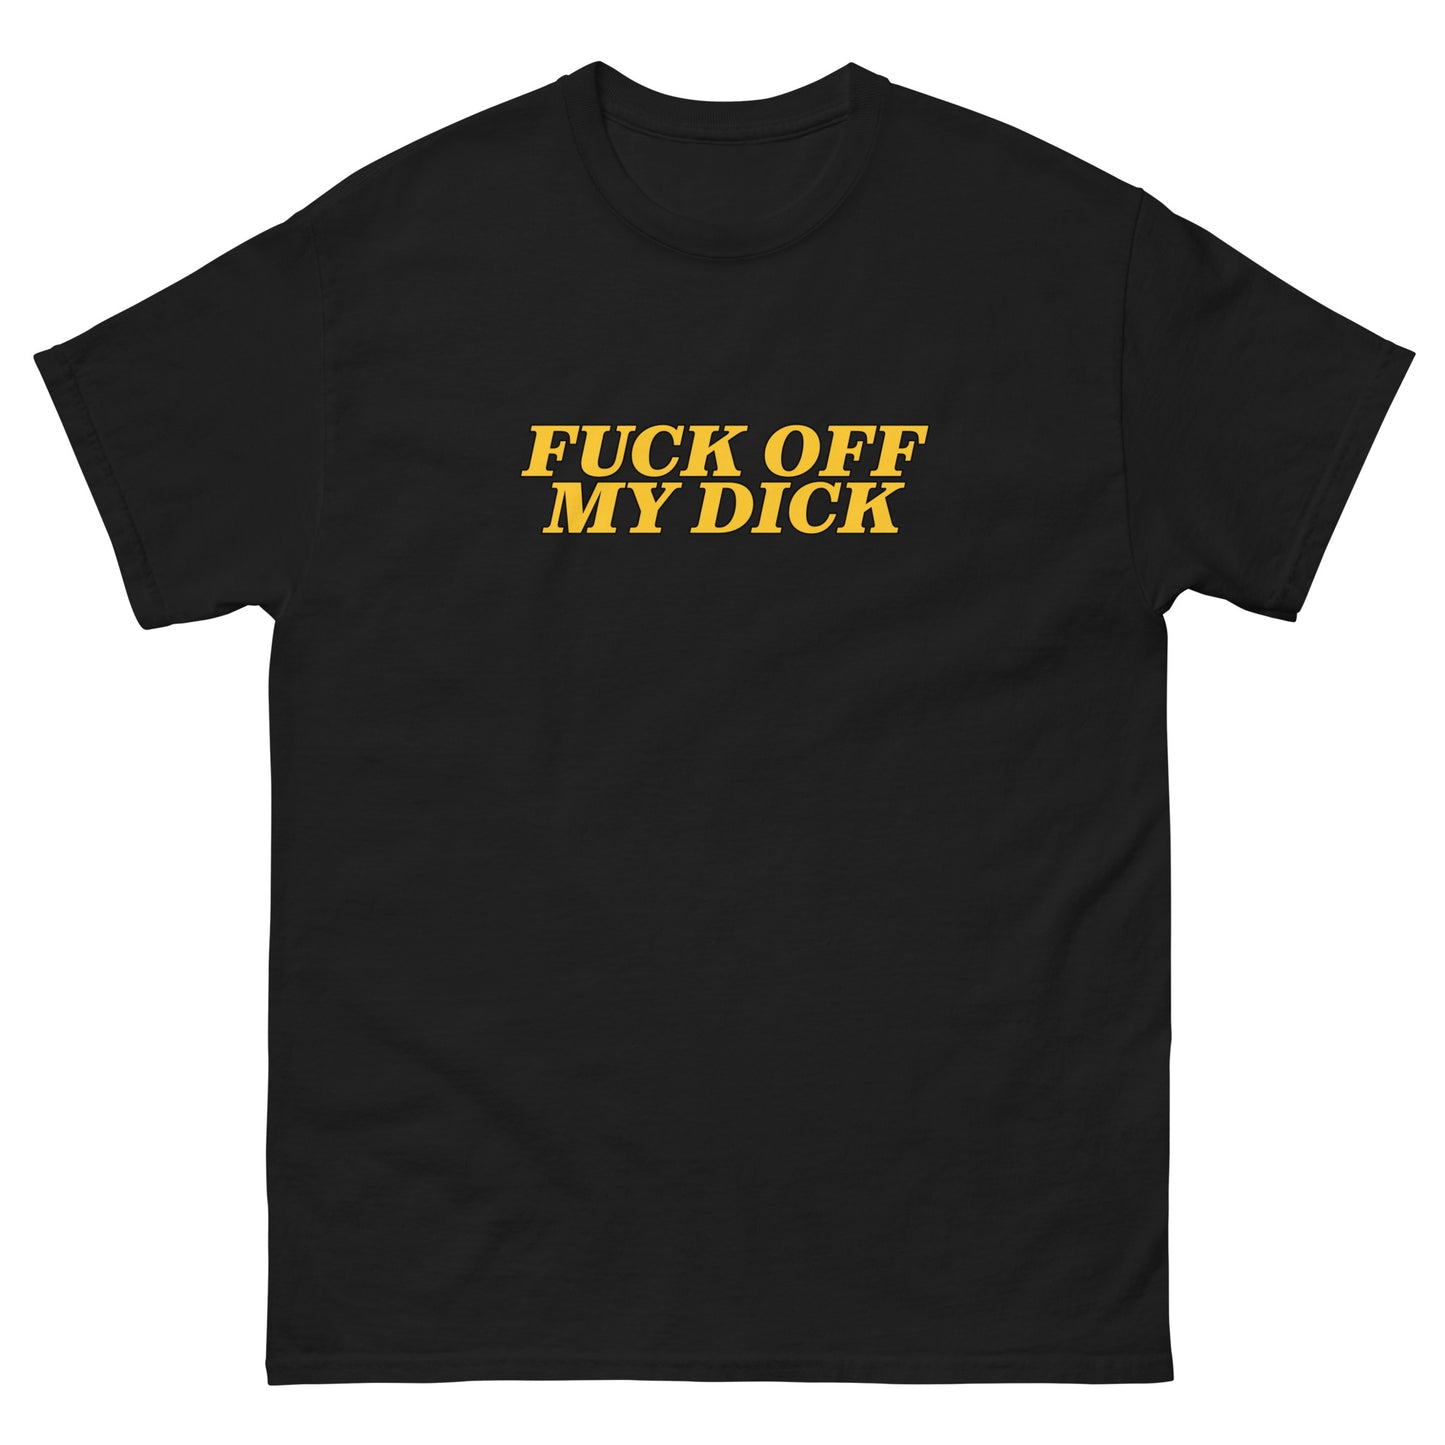 FUCK OFF MY DICK graphic